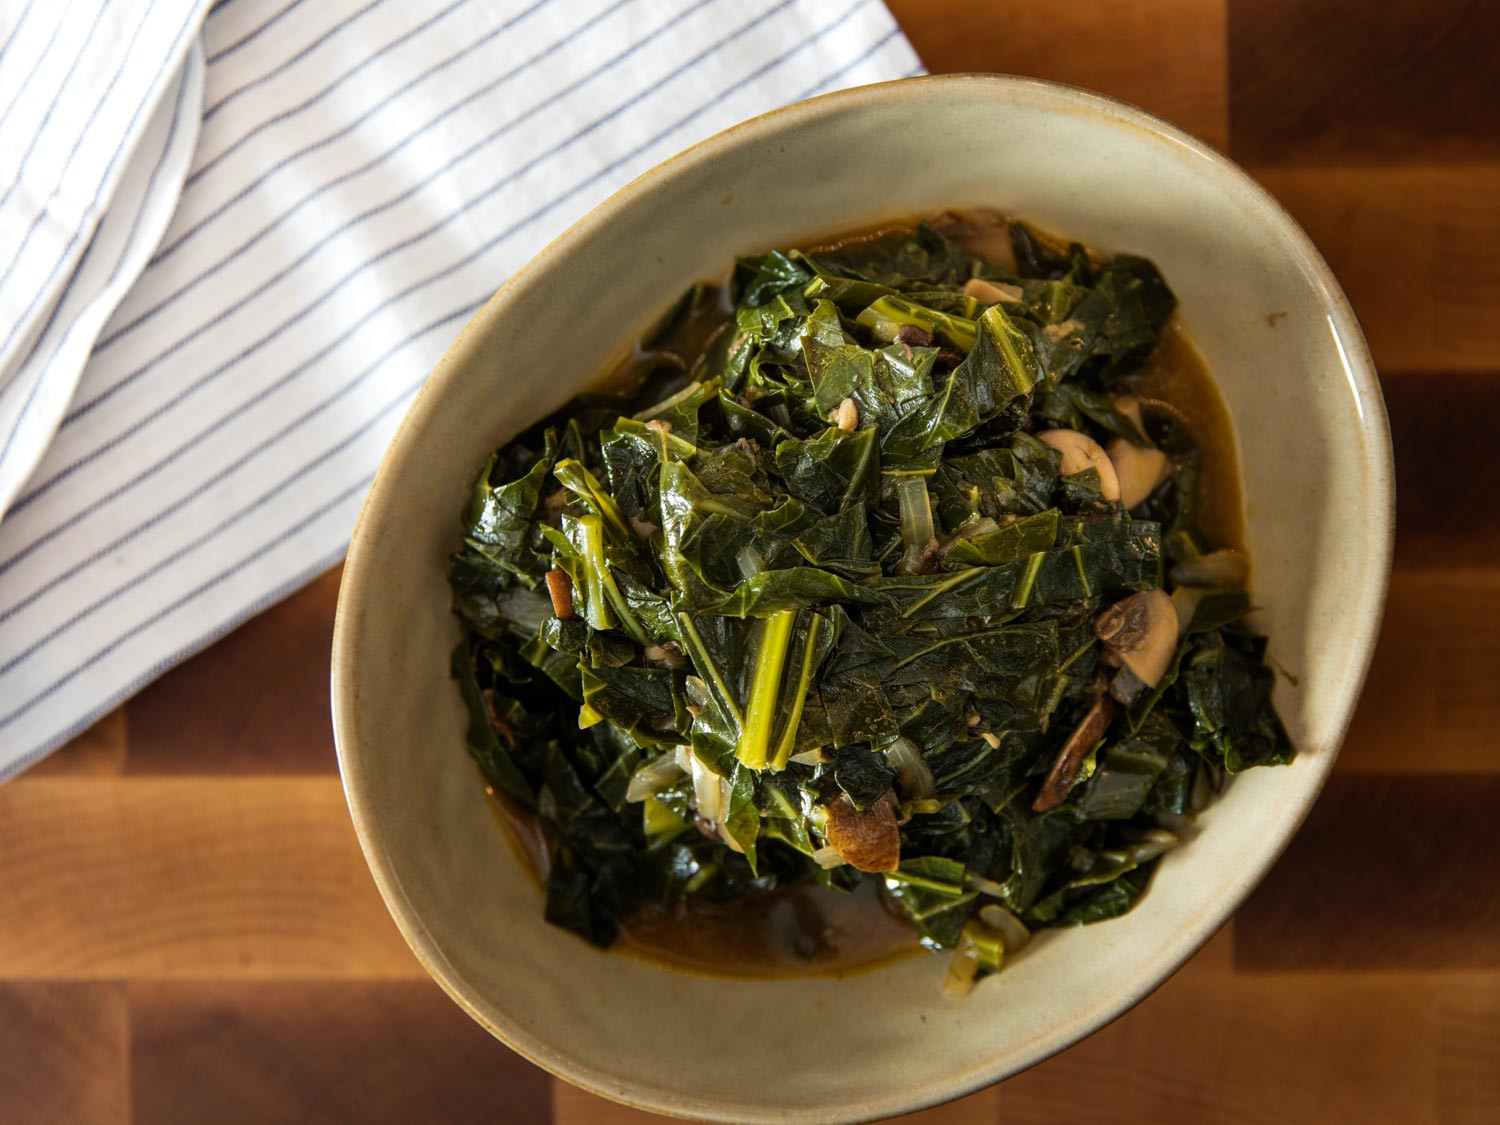 Vegetarian Collard Greens Recipes
 How to Make Rich and Smoky Collard Greens With or Without